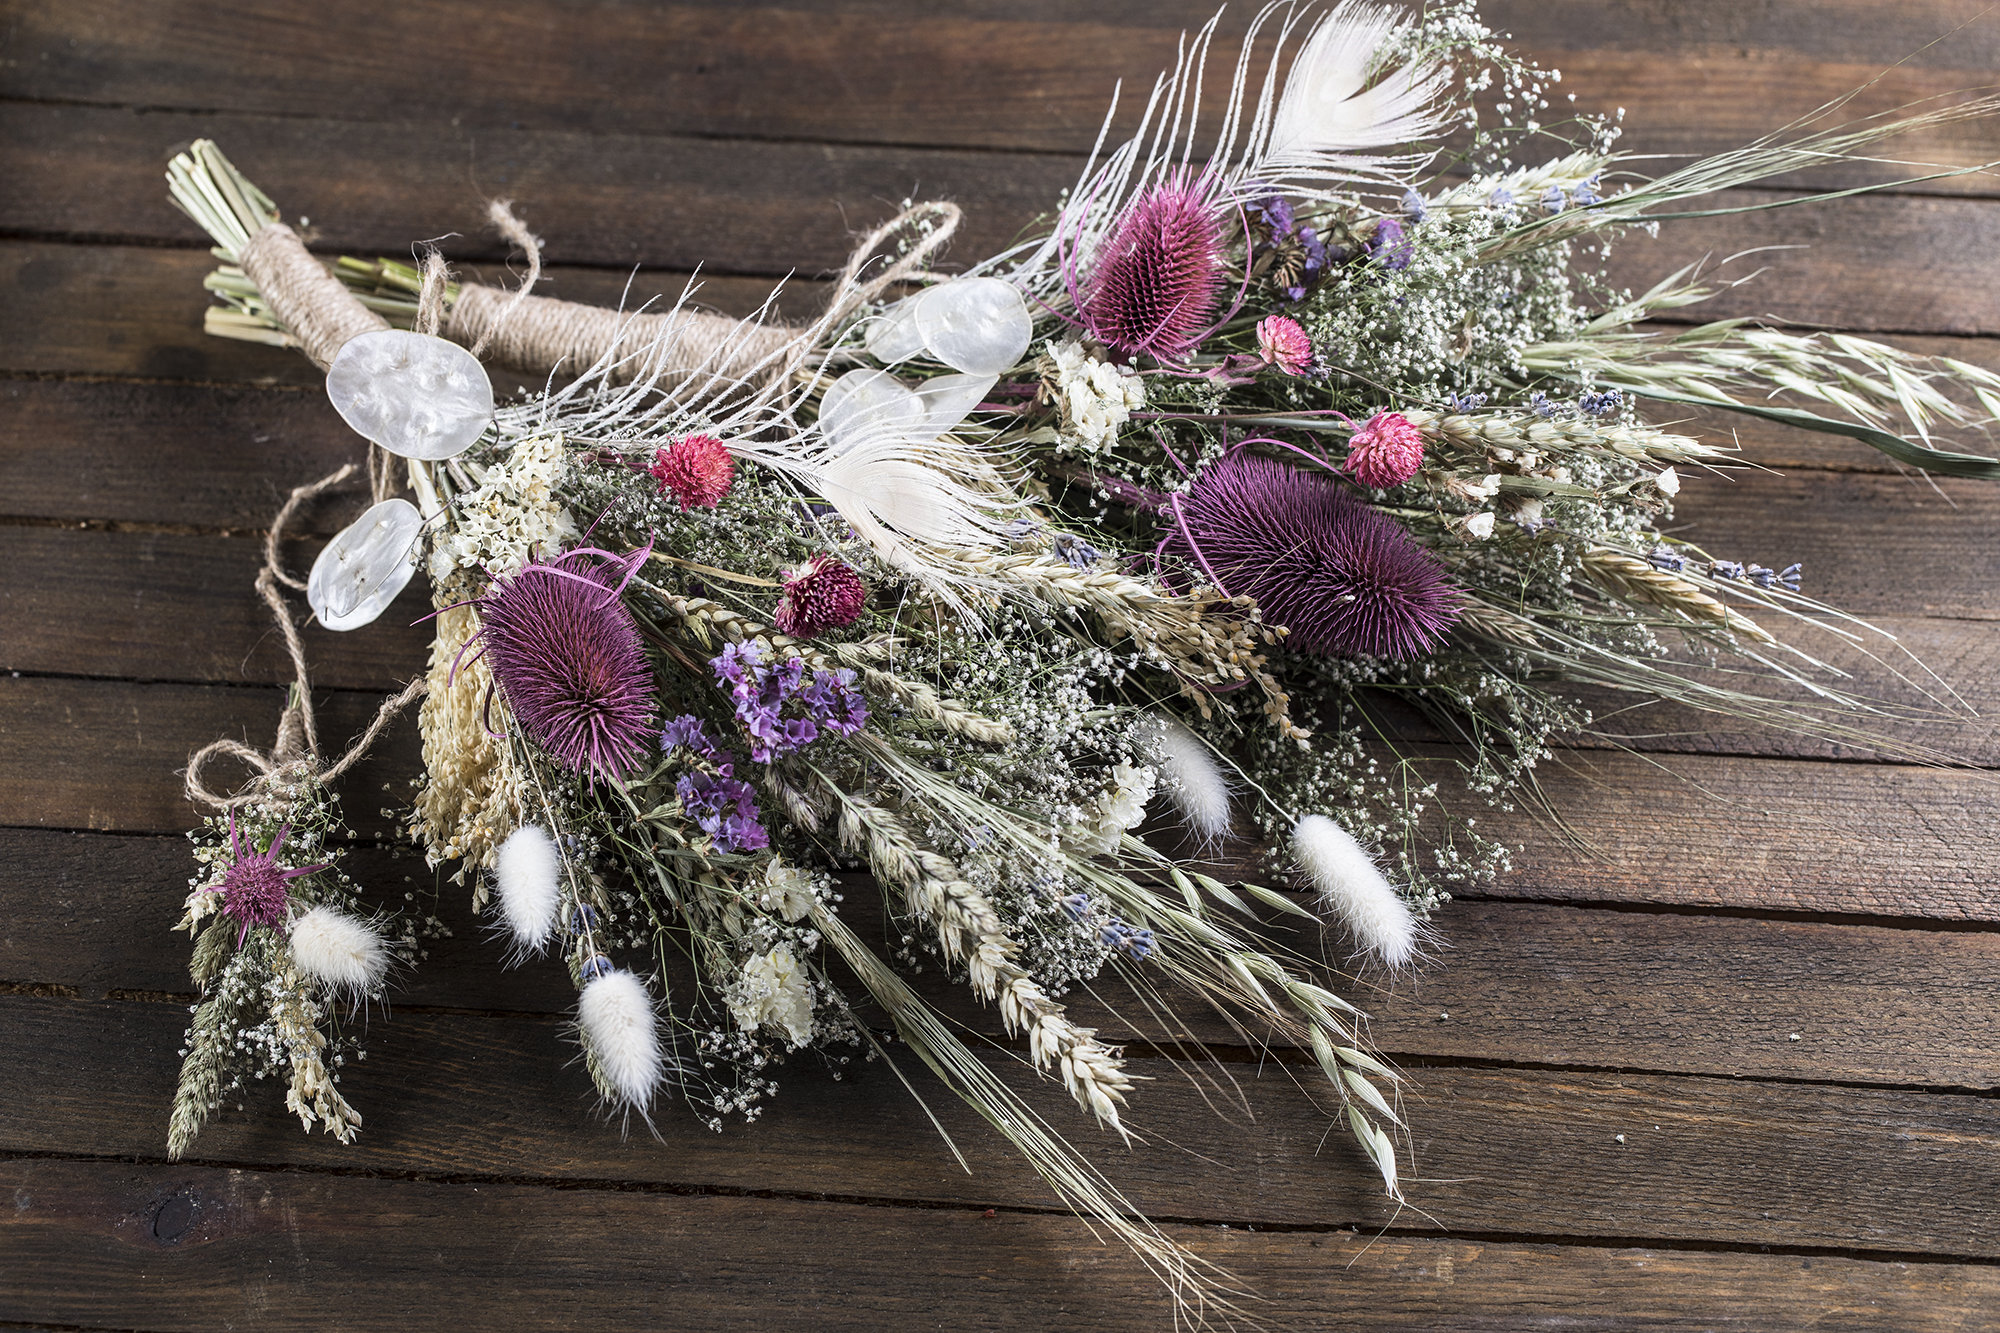 Dried flower thistle rose bouquet with dried lunaria babybreath flowers dried flower arrangement rustic home decor rustic wedding